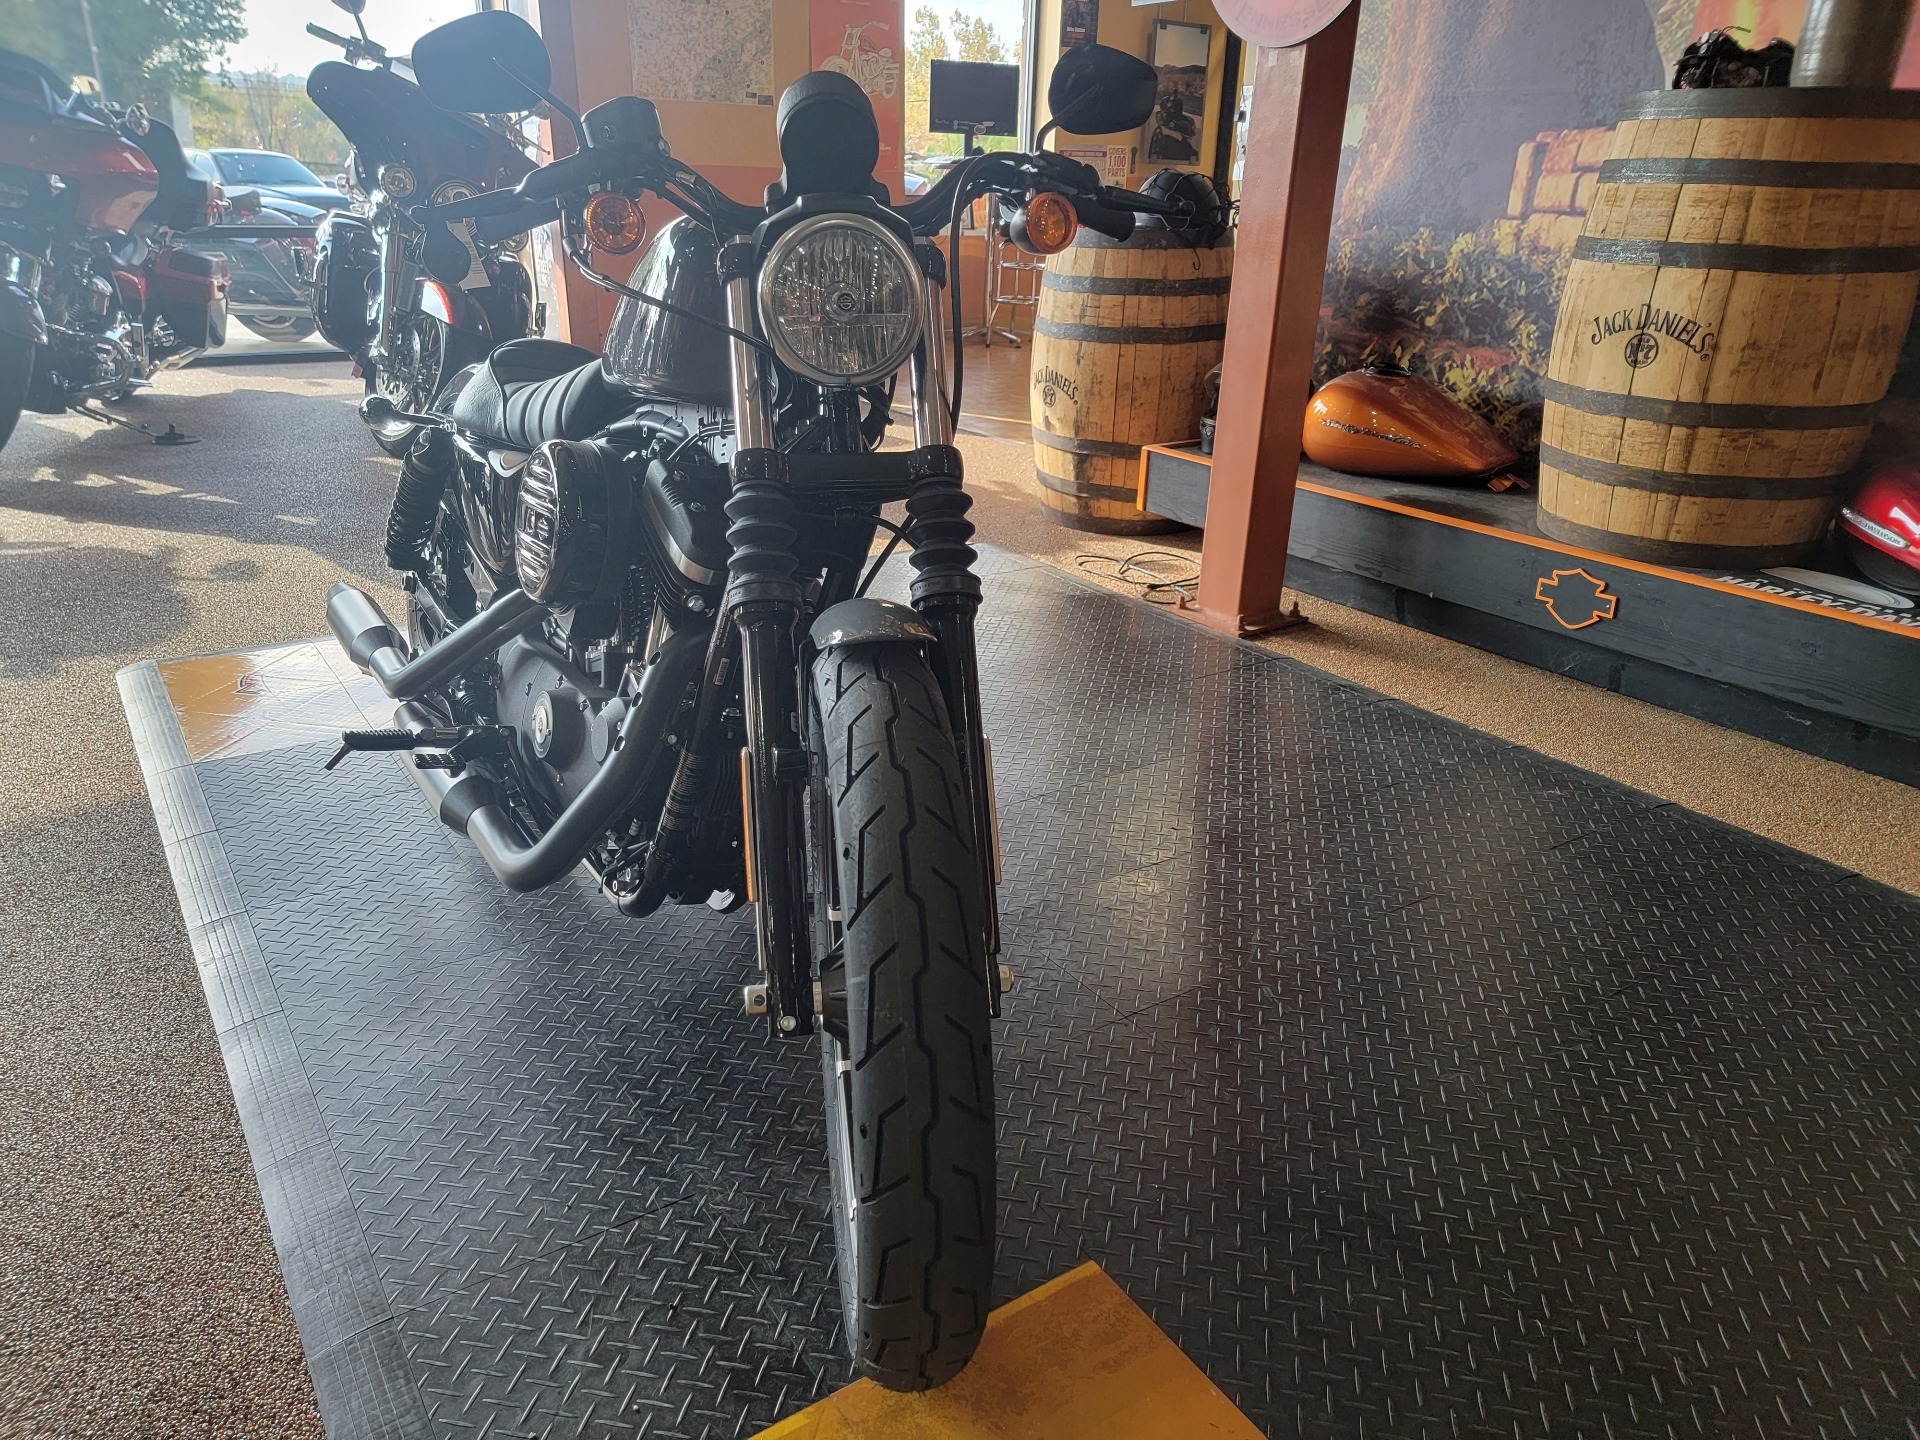 2022 Harley-Davidson Iron 883™ in Knoxville, Tennessee - Photo 2